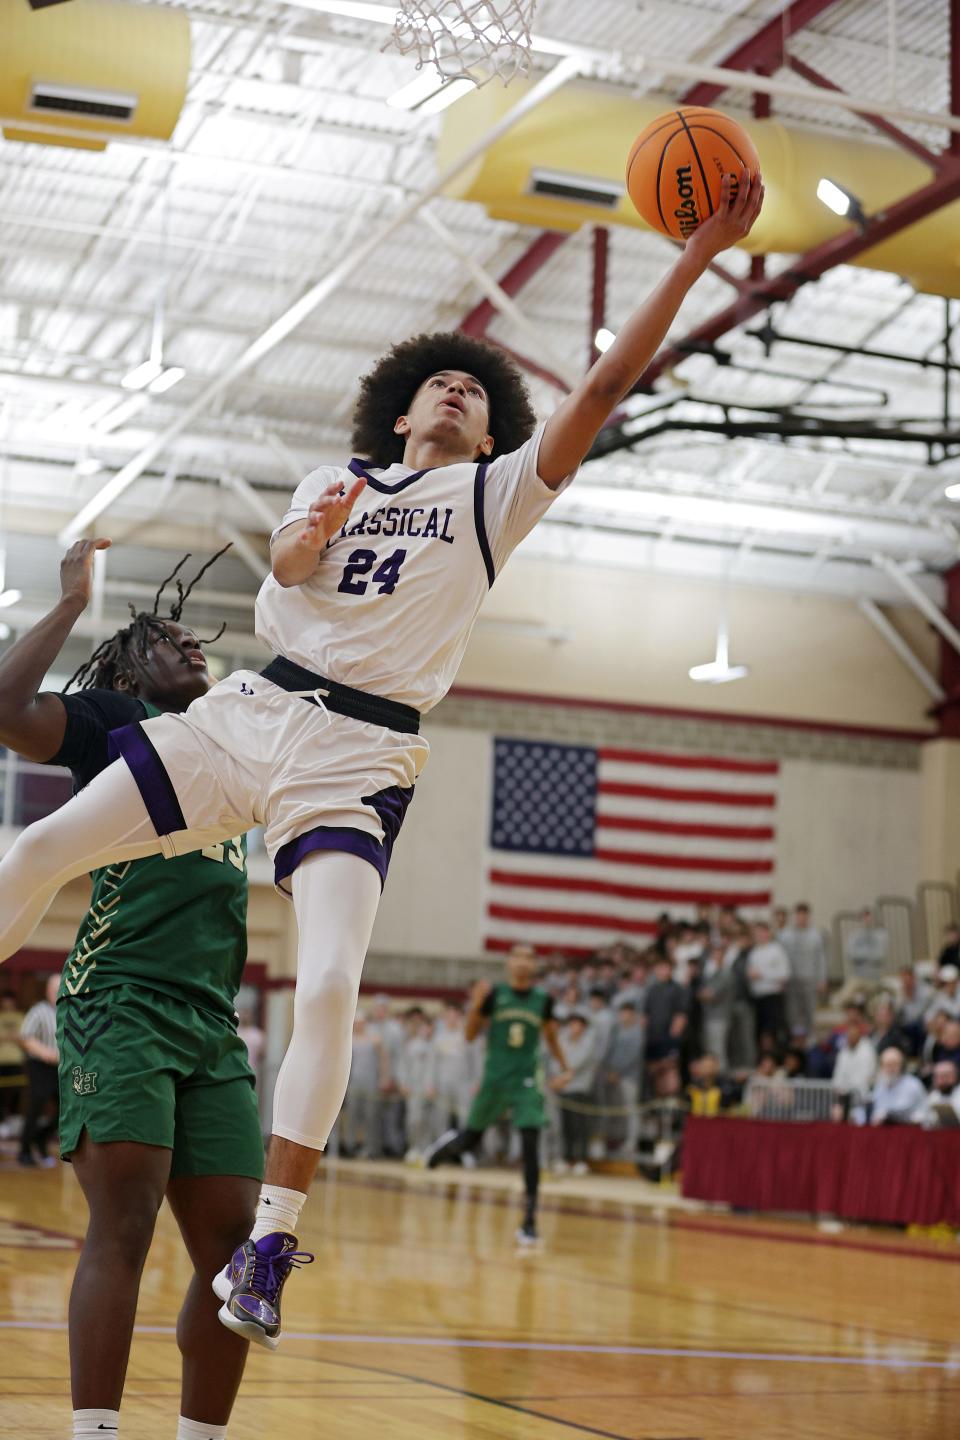 Classical's Eliezer Delbrey goes up for a score against Hendricken in Sunday's Division I Boys Basketball semifinal at Rhode Island College.